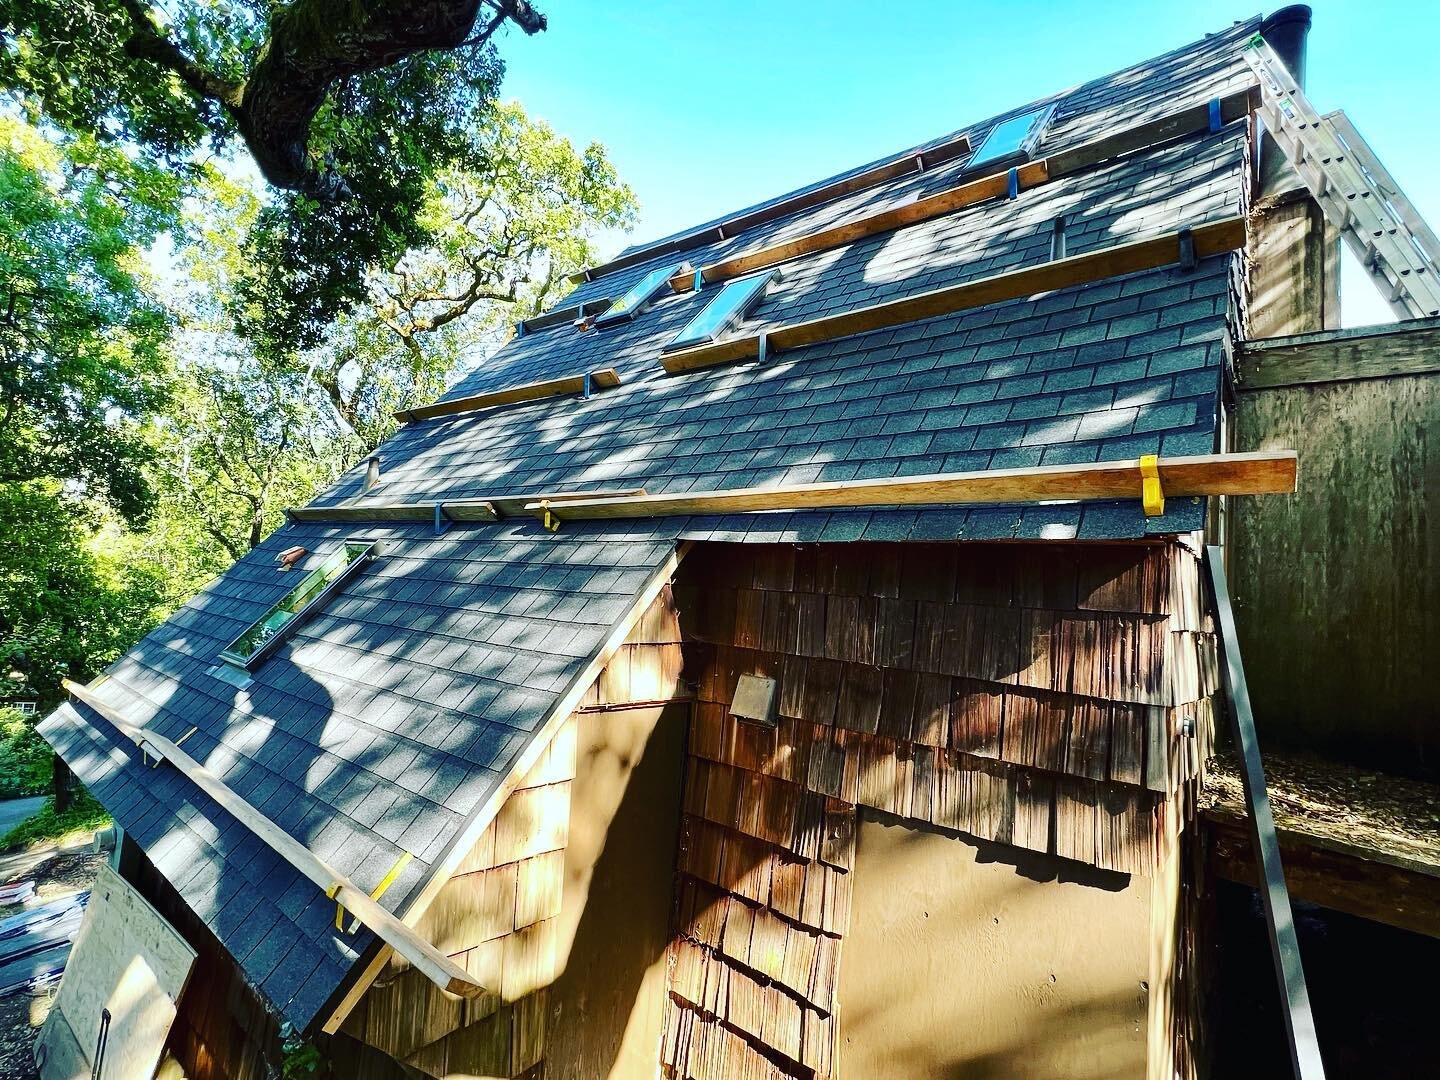 Well, after a very wet winter, we finally have half a roof. More to come on Monday. Thanks to Ari, his dad, and the whole crew at Piscatelli Roofing. Not quite the roof we might spec. for our clients but it should be just fine for us.
.
#roofing 
#ro